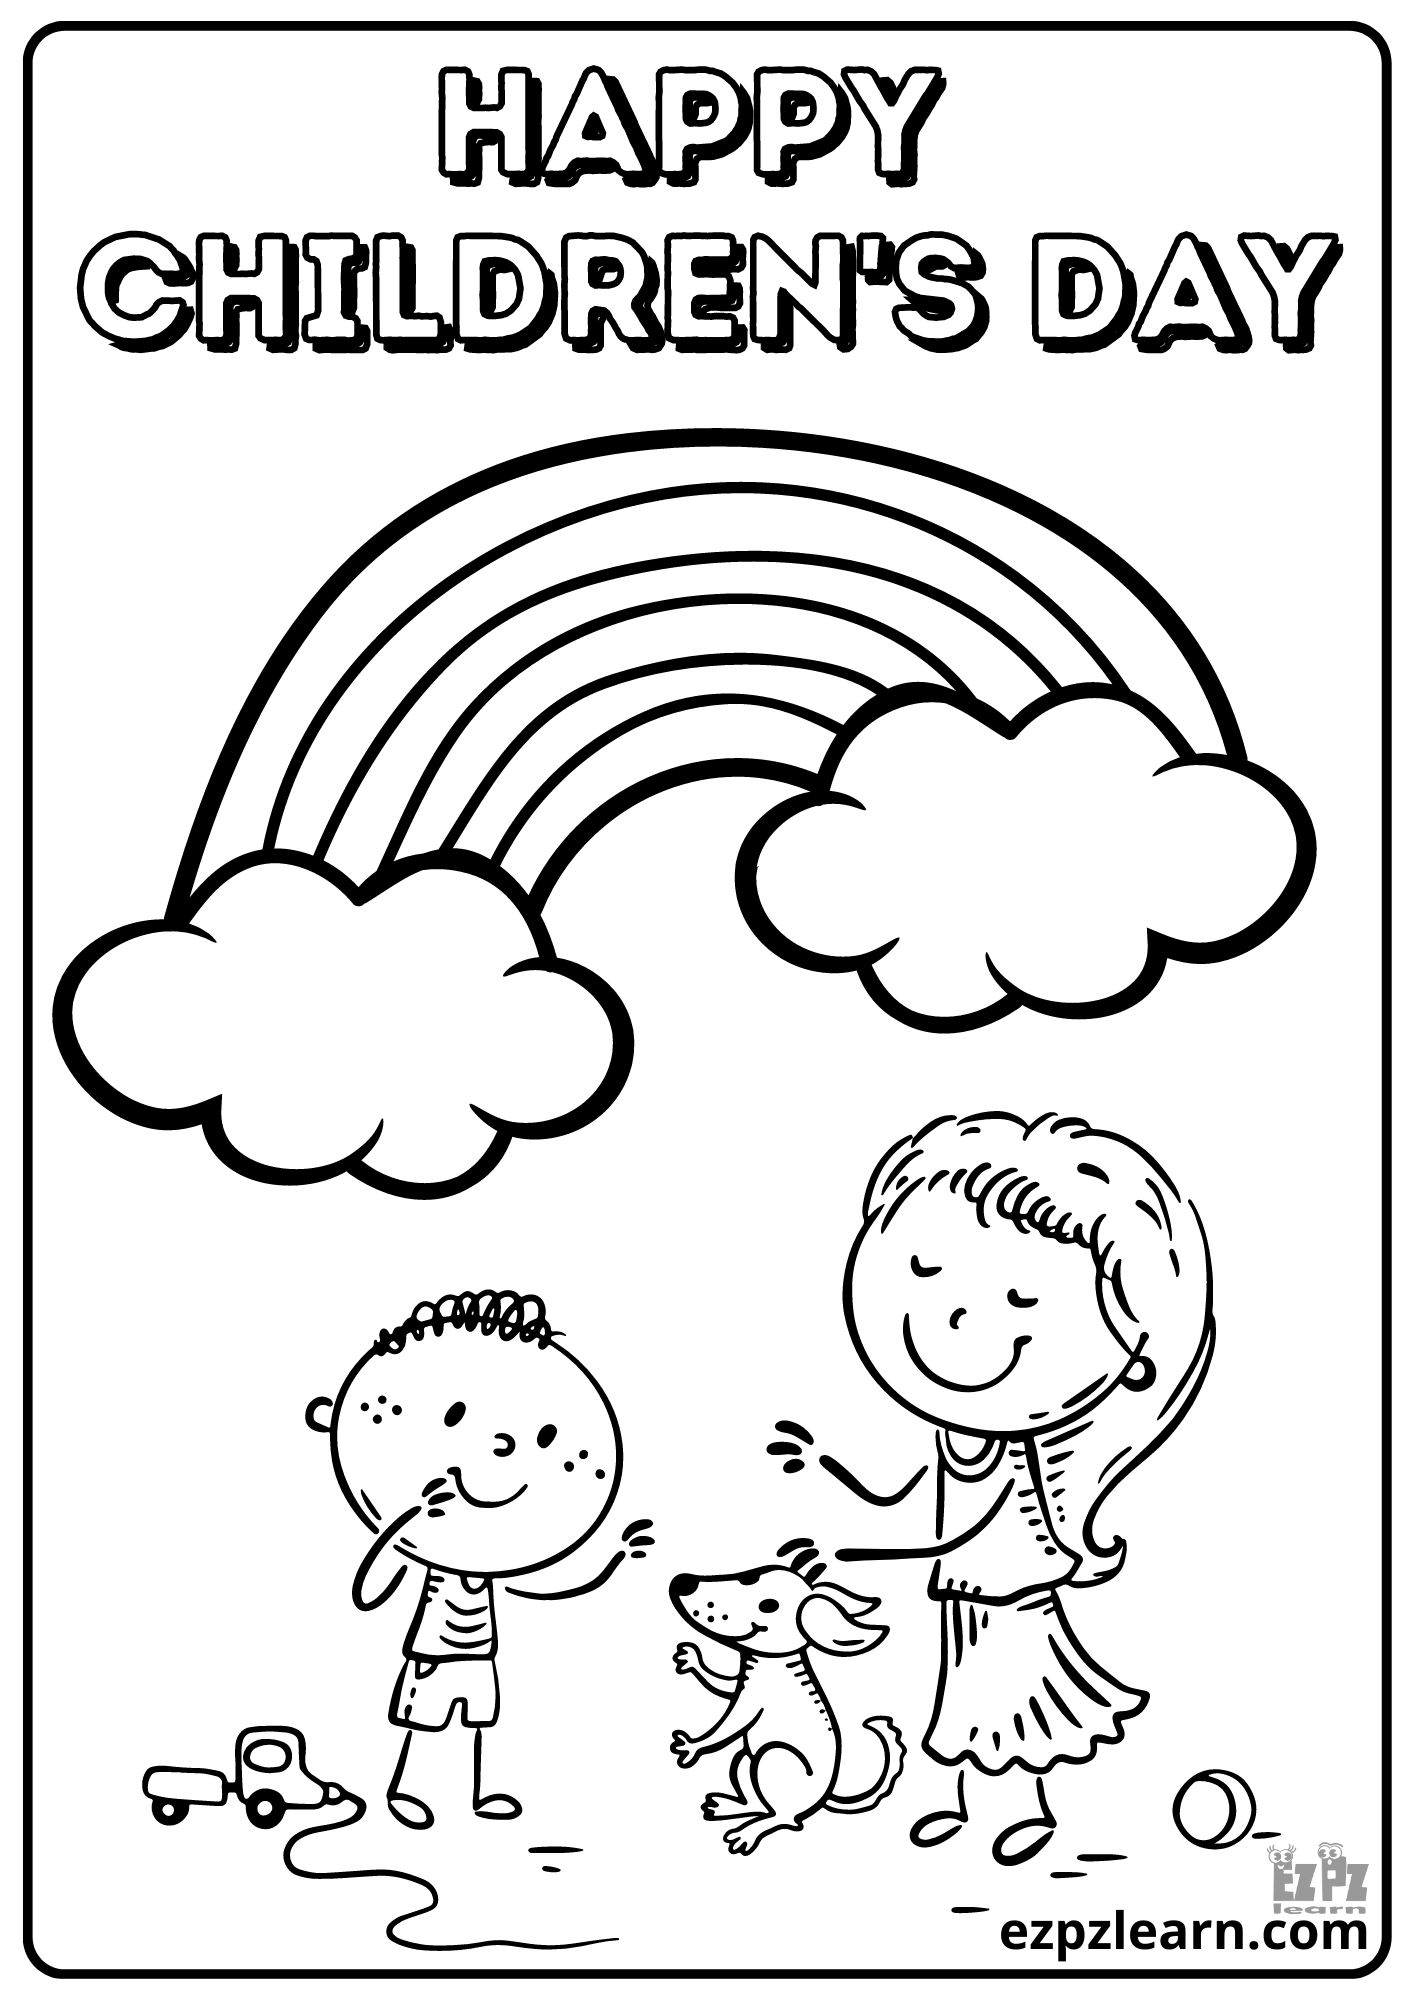 Happy Children's day easy drawing | Easy children day illustration for  greeting card - YouTube | Happy teachers day card, Happy drawing, Card  drawing